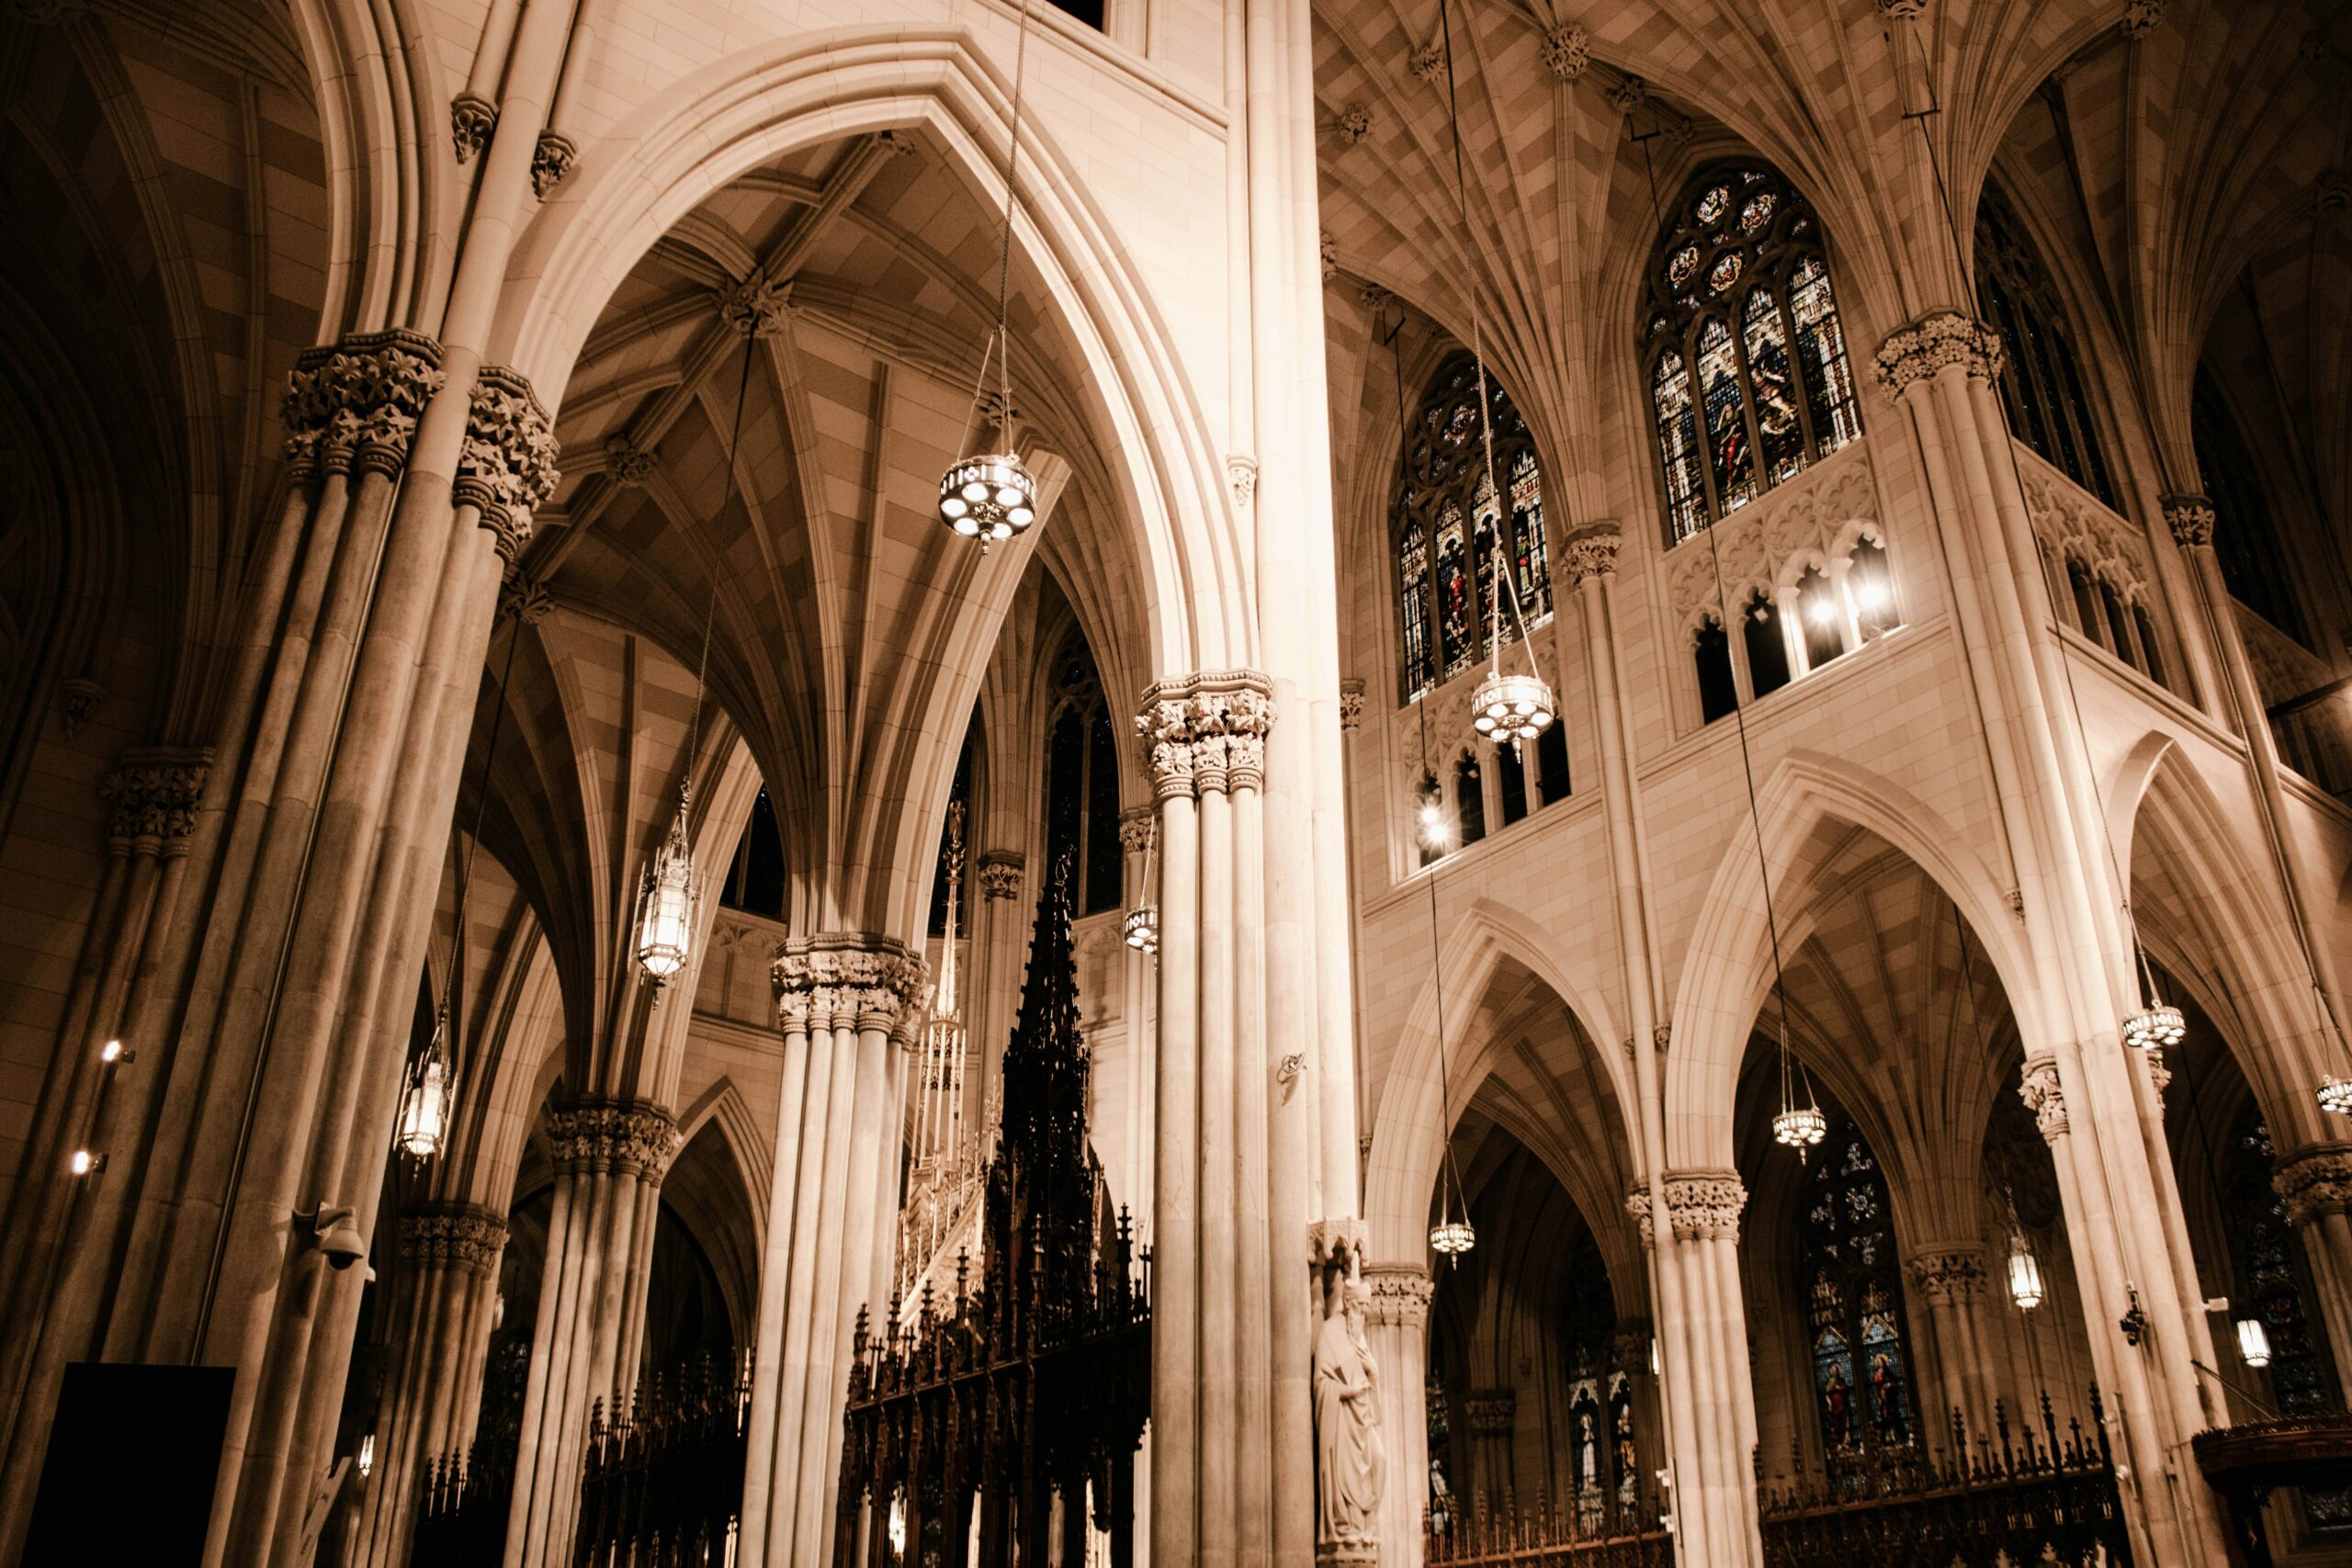 An image of the inside of St. Patrick's Cathedral, New York, United States